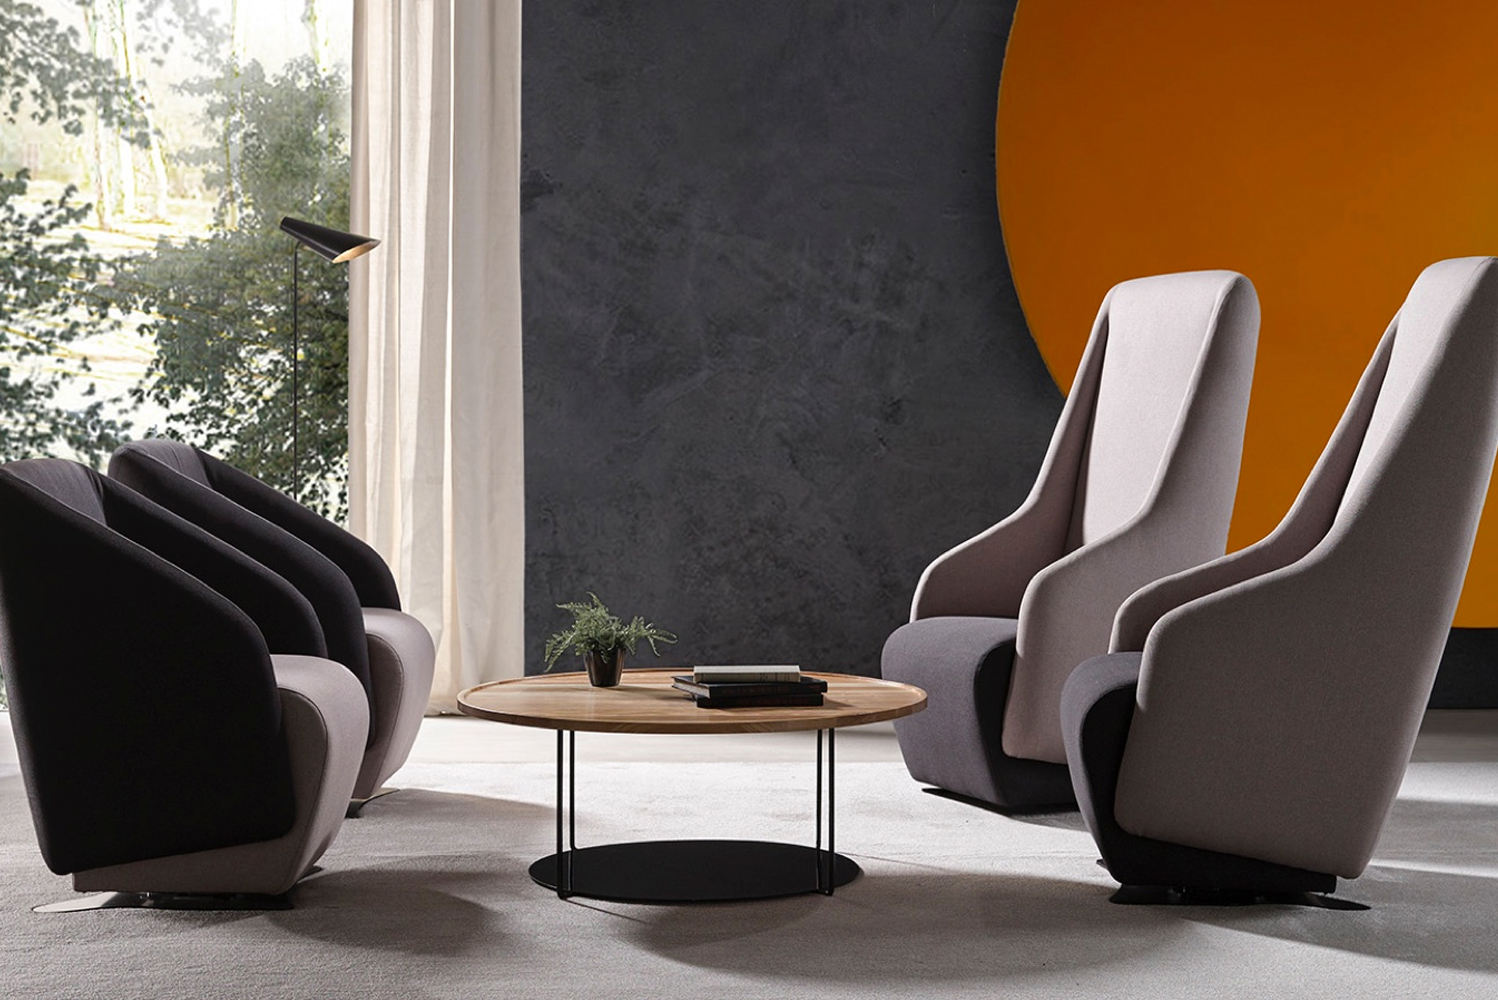 Introducing Lily armchair from designer Dsignio and manufacturer Belt and Frajumar 